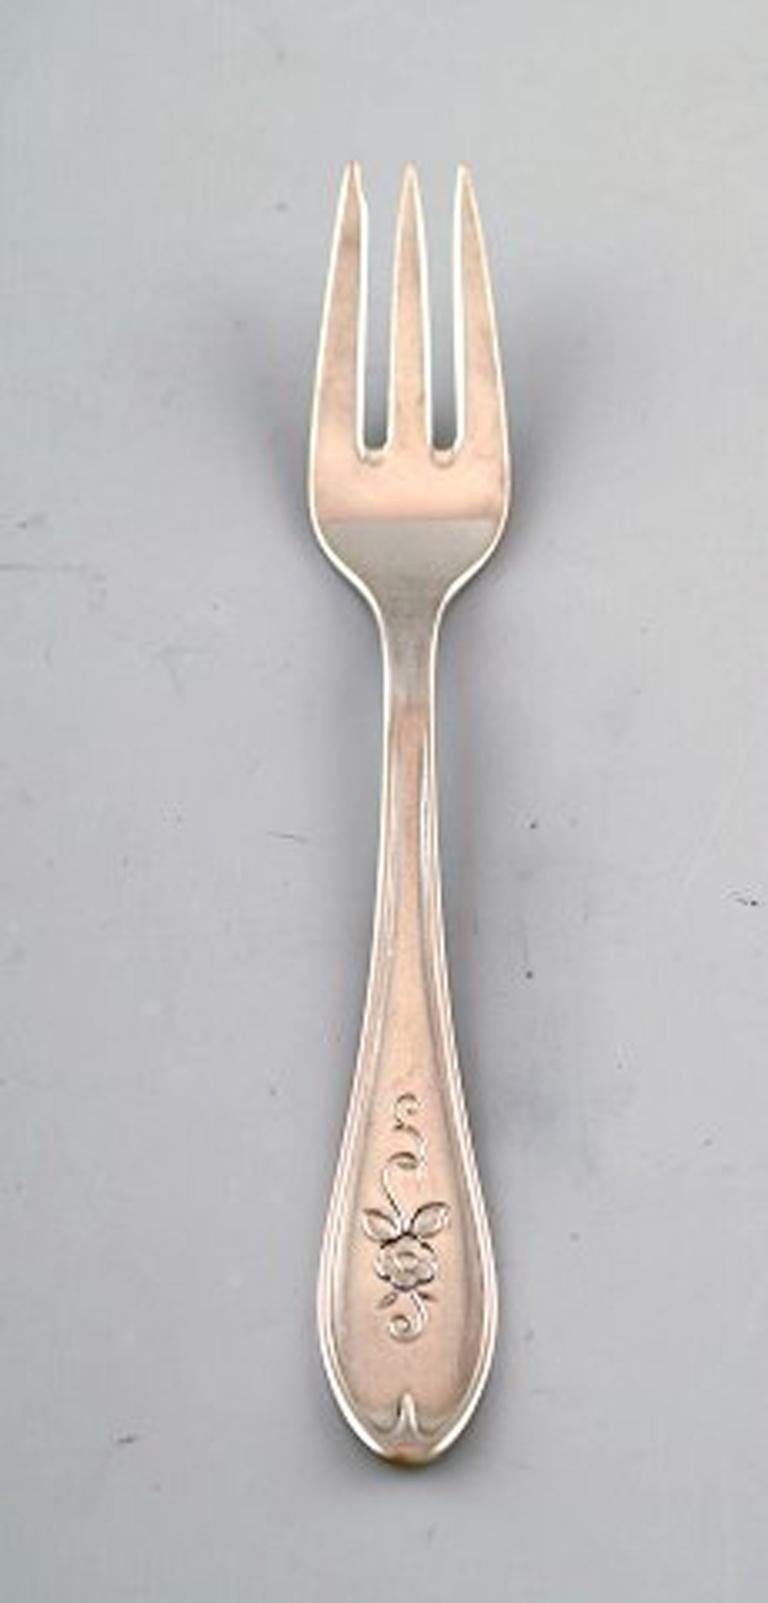 Danish silversmith. Set of 4 cake forks in silver, 1930.
Stamped.
In very good condition.
Measures: 14 cm.